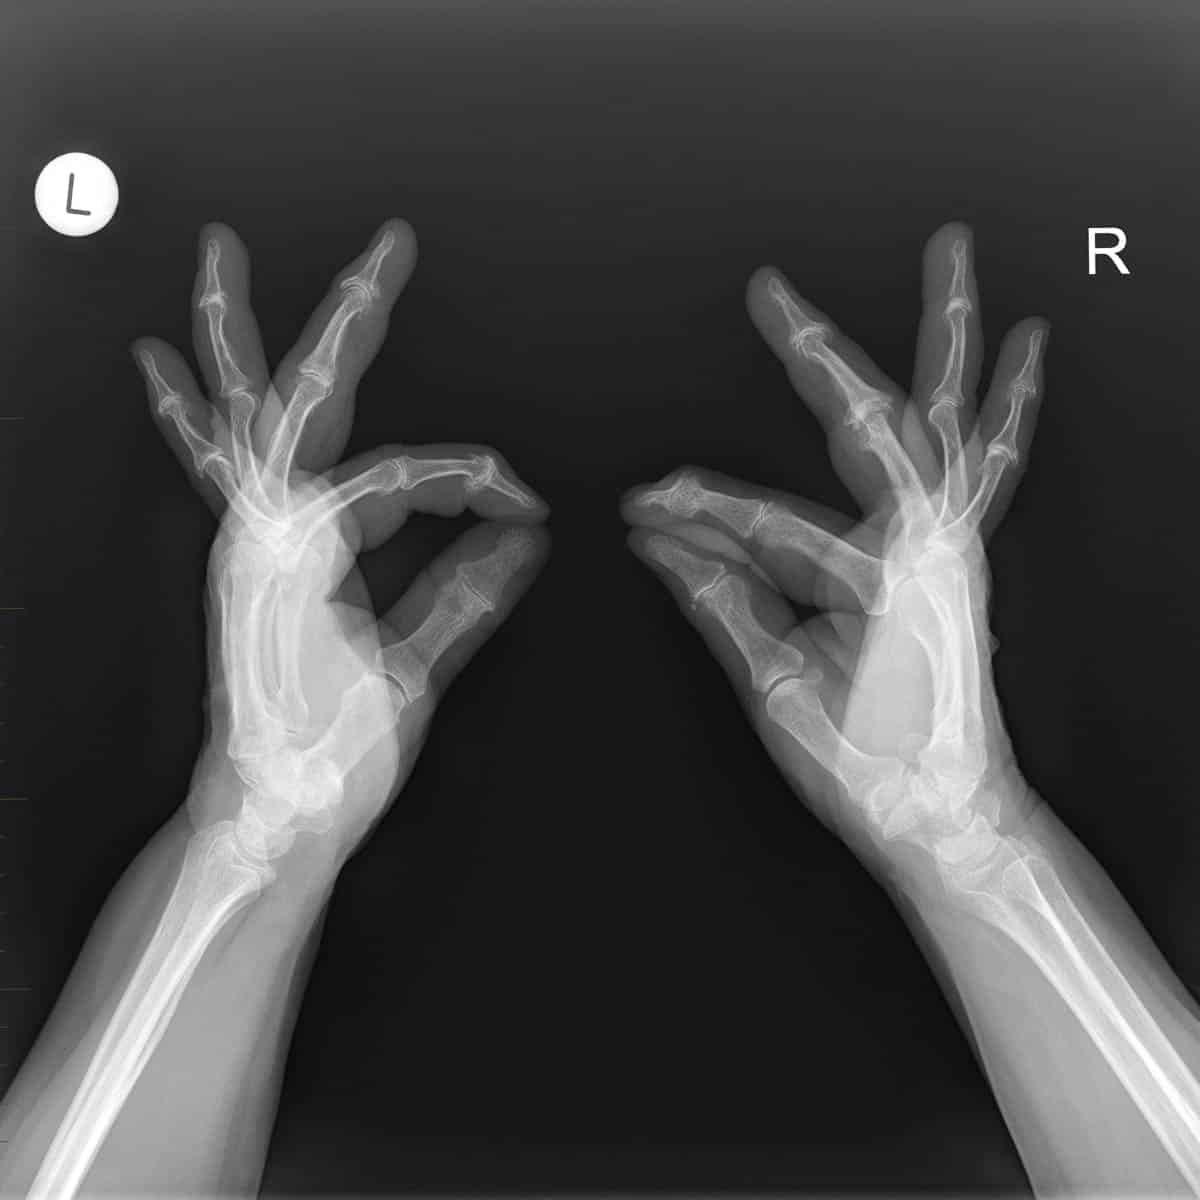 Thumb pinch radiographs as part of assessing a patient for arthritis.